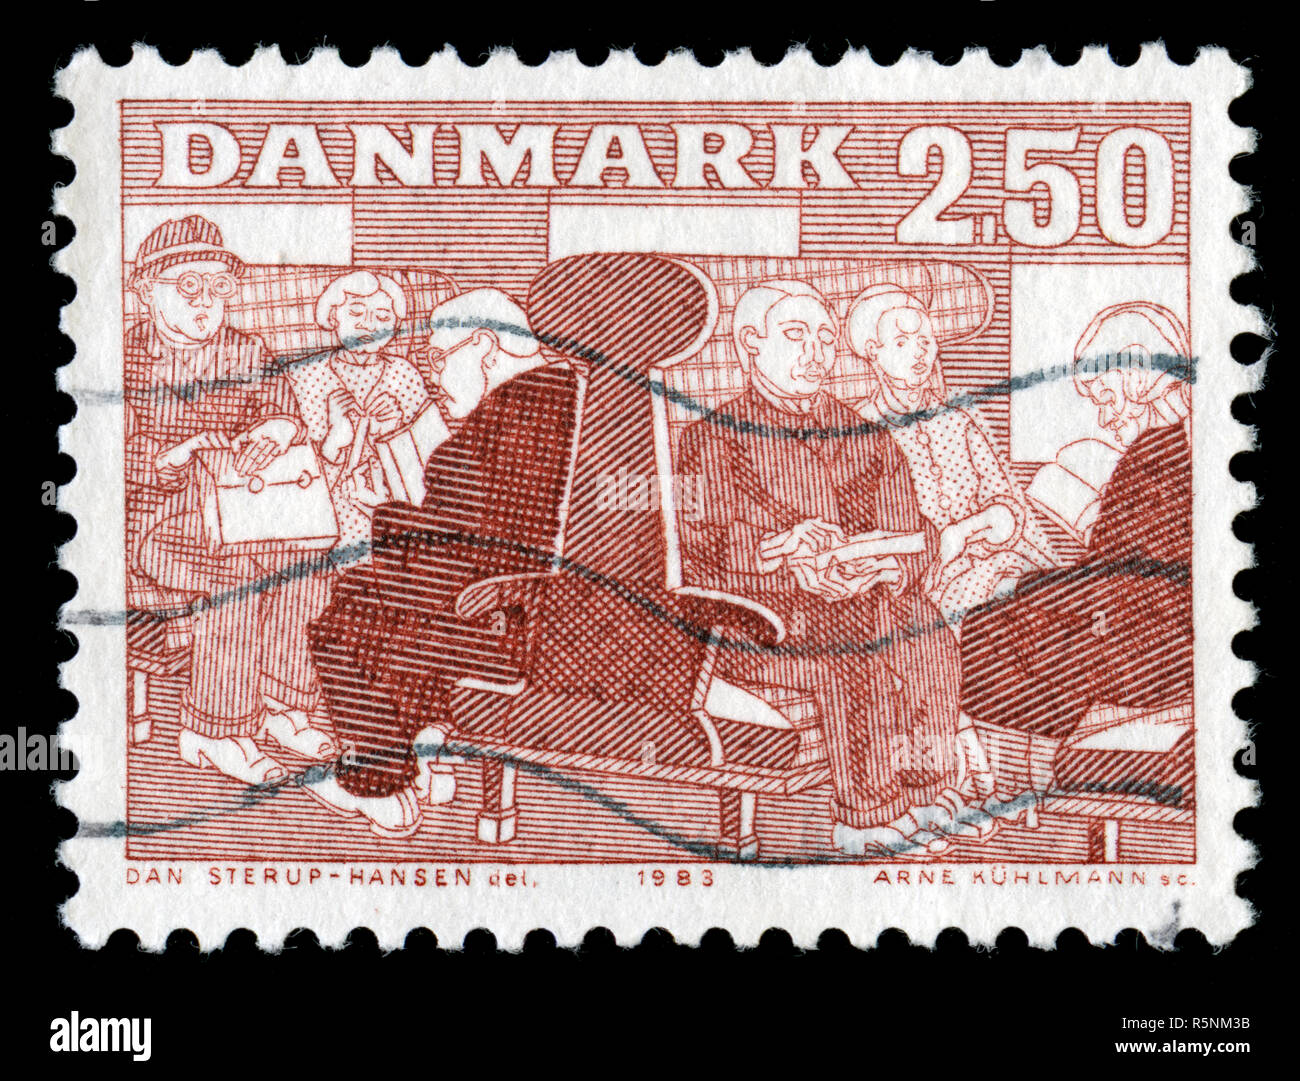 Postage stamp from Denmark in the Int. Year of the Elderly people series issued in 1983 Stock Photo